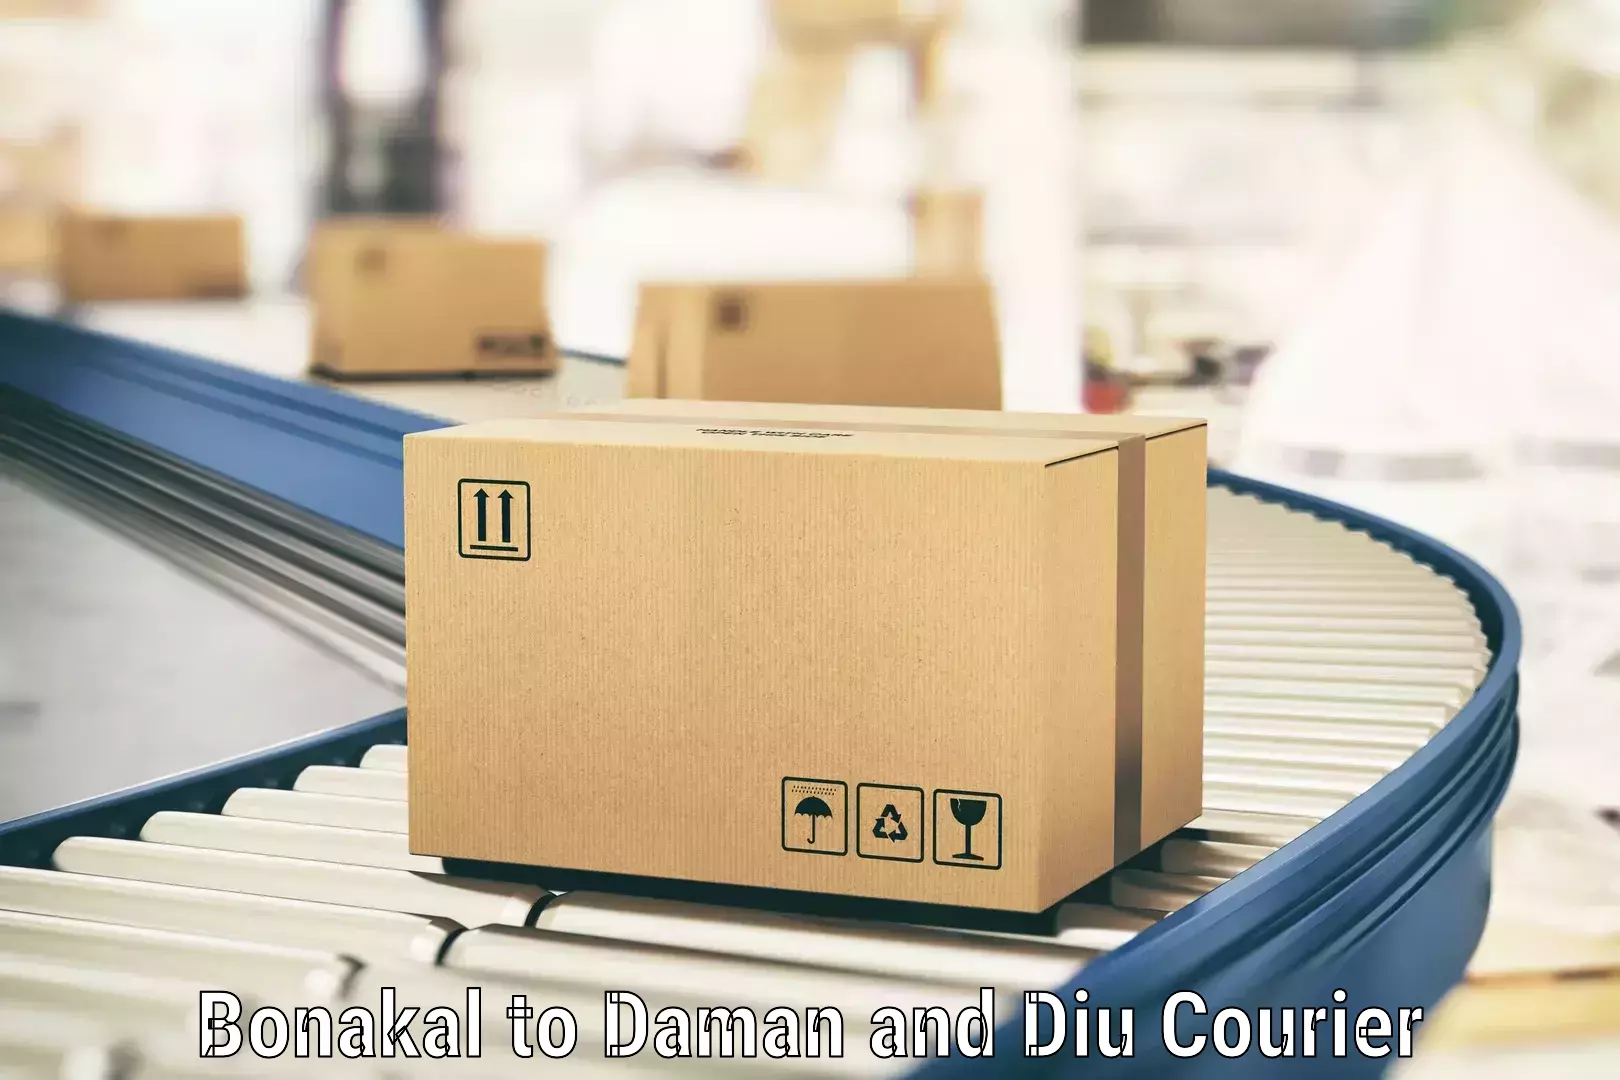 Global courier networks Bonakal to Daman and Diu